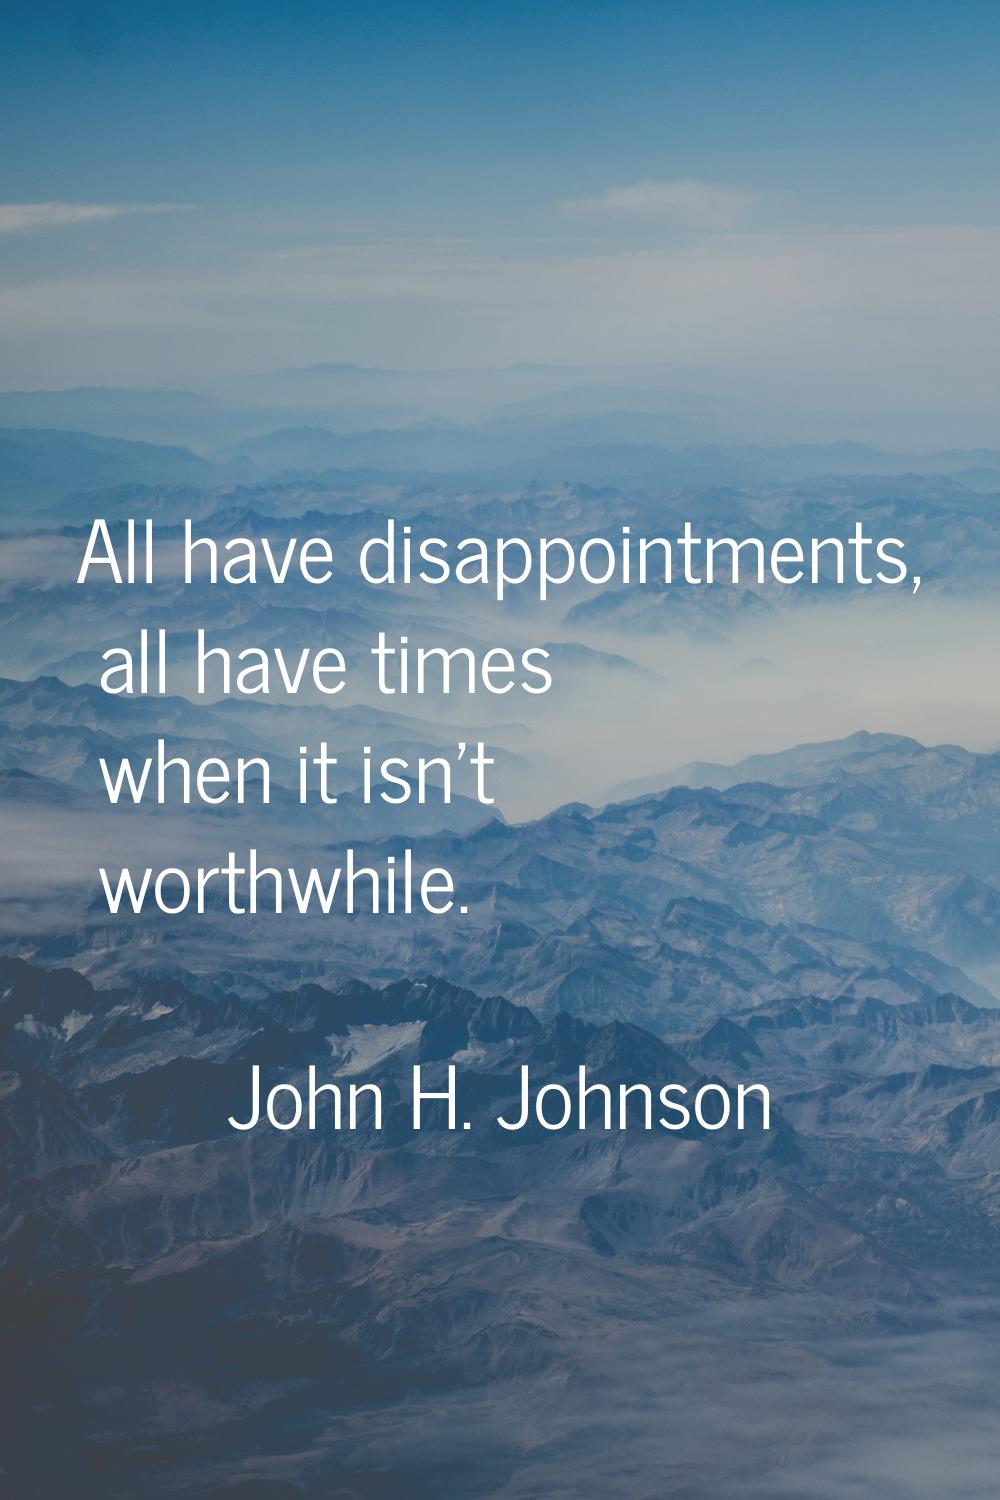 All have disappointments, all have times when it isn't worthwhile.